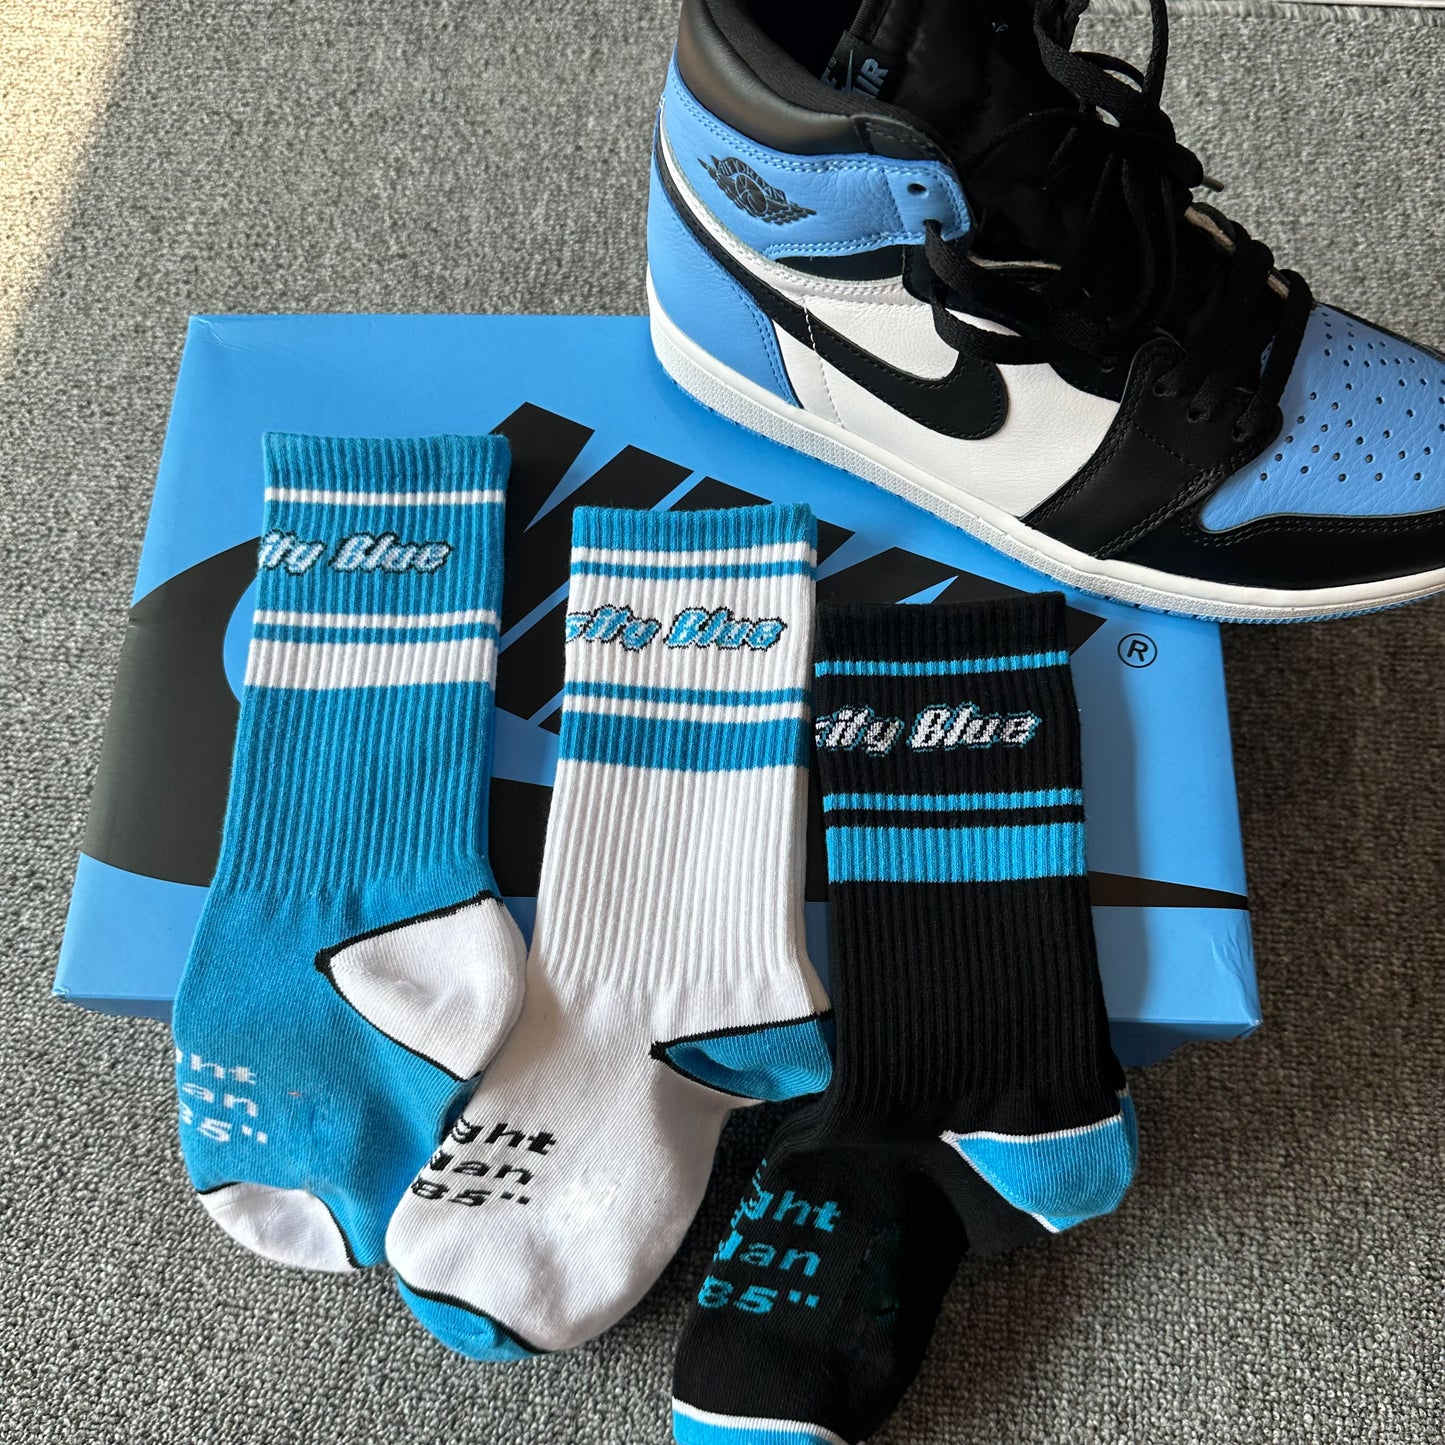 University Blue socks (3 colorway available)